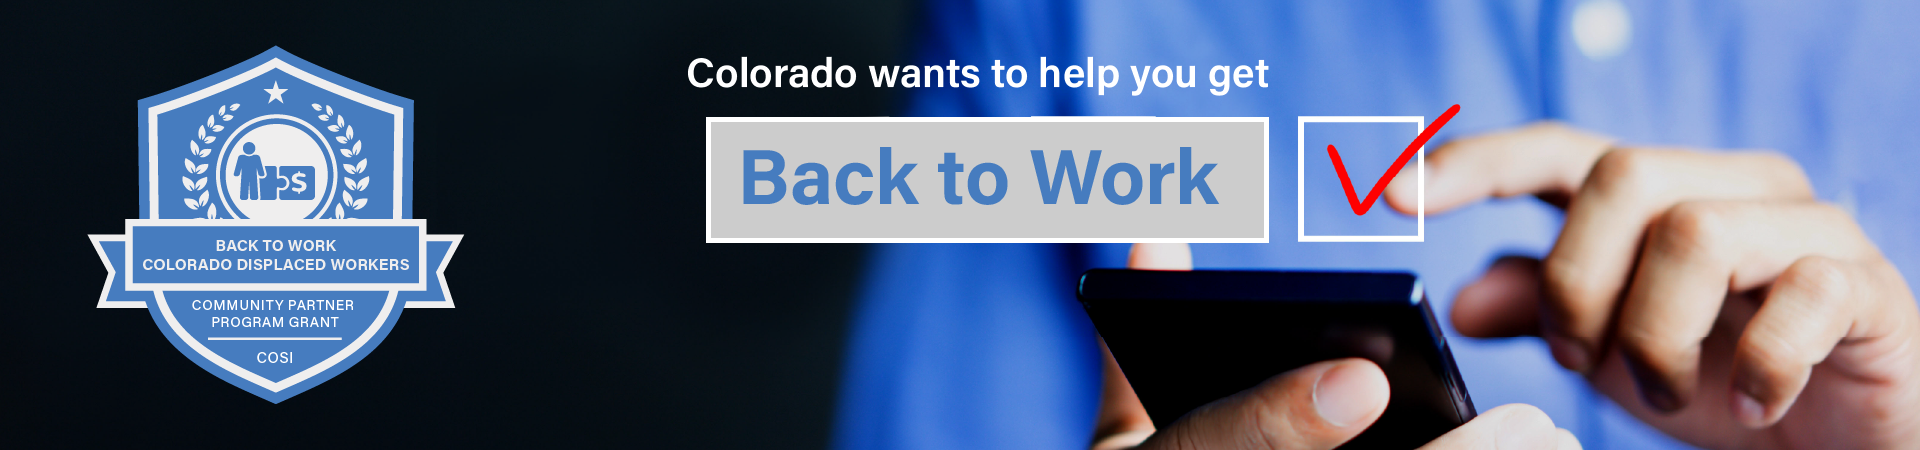 Program badge with the words "Colorado wants to help you get Back to Work"